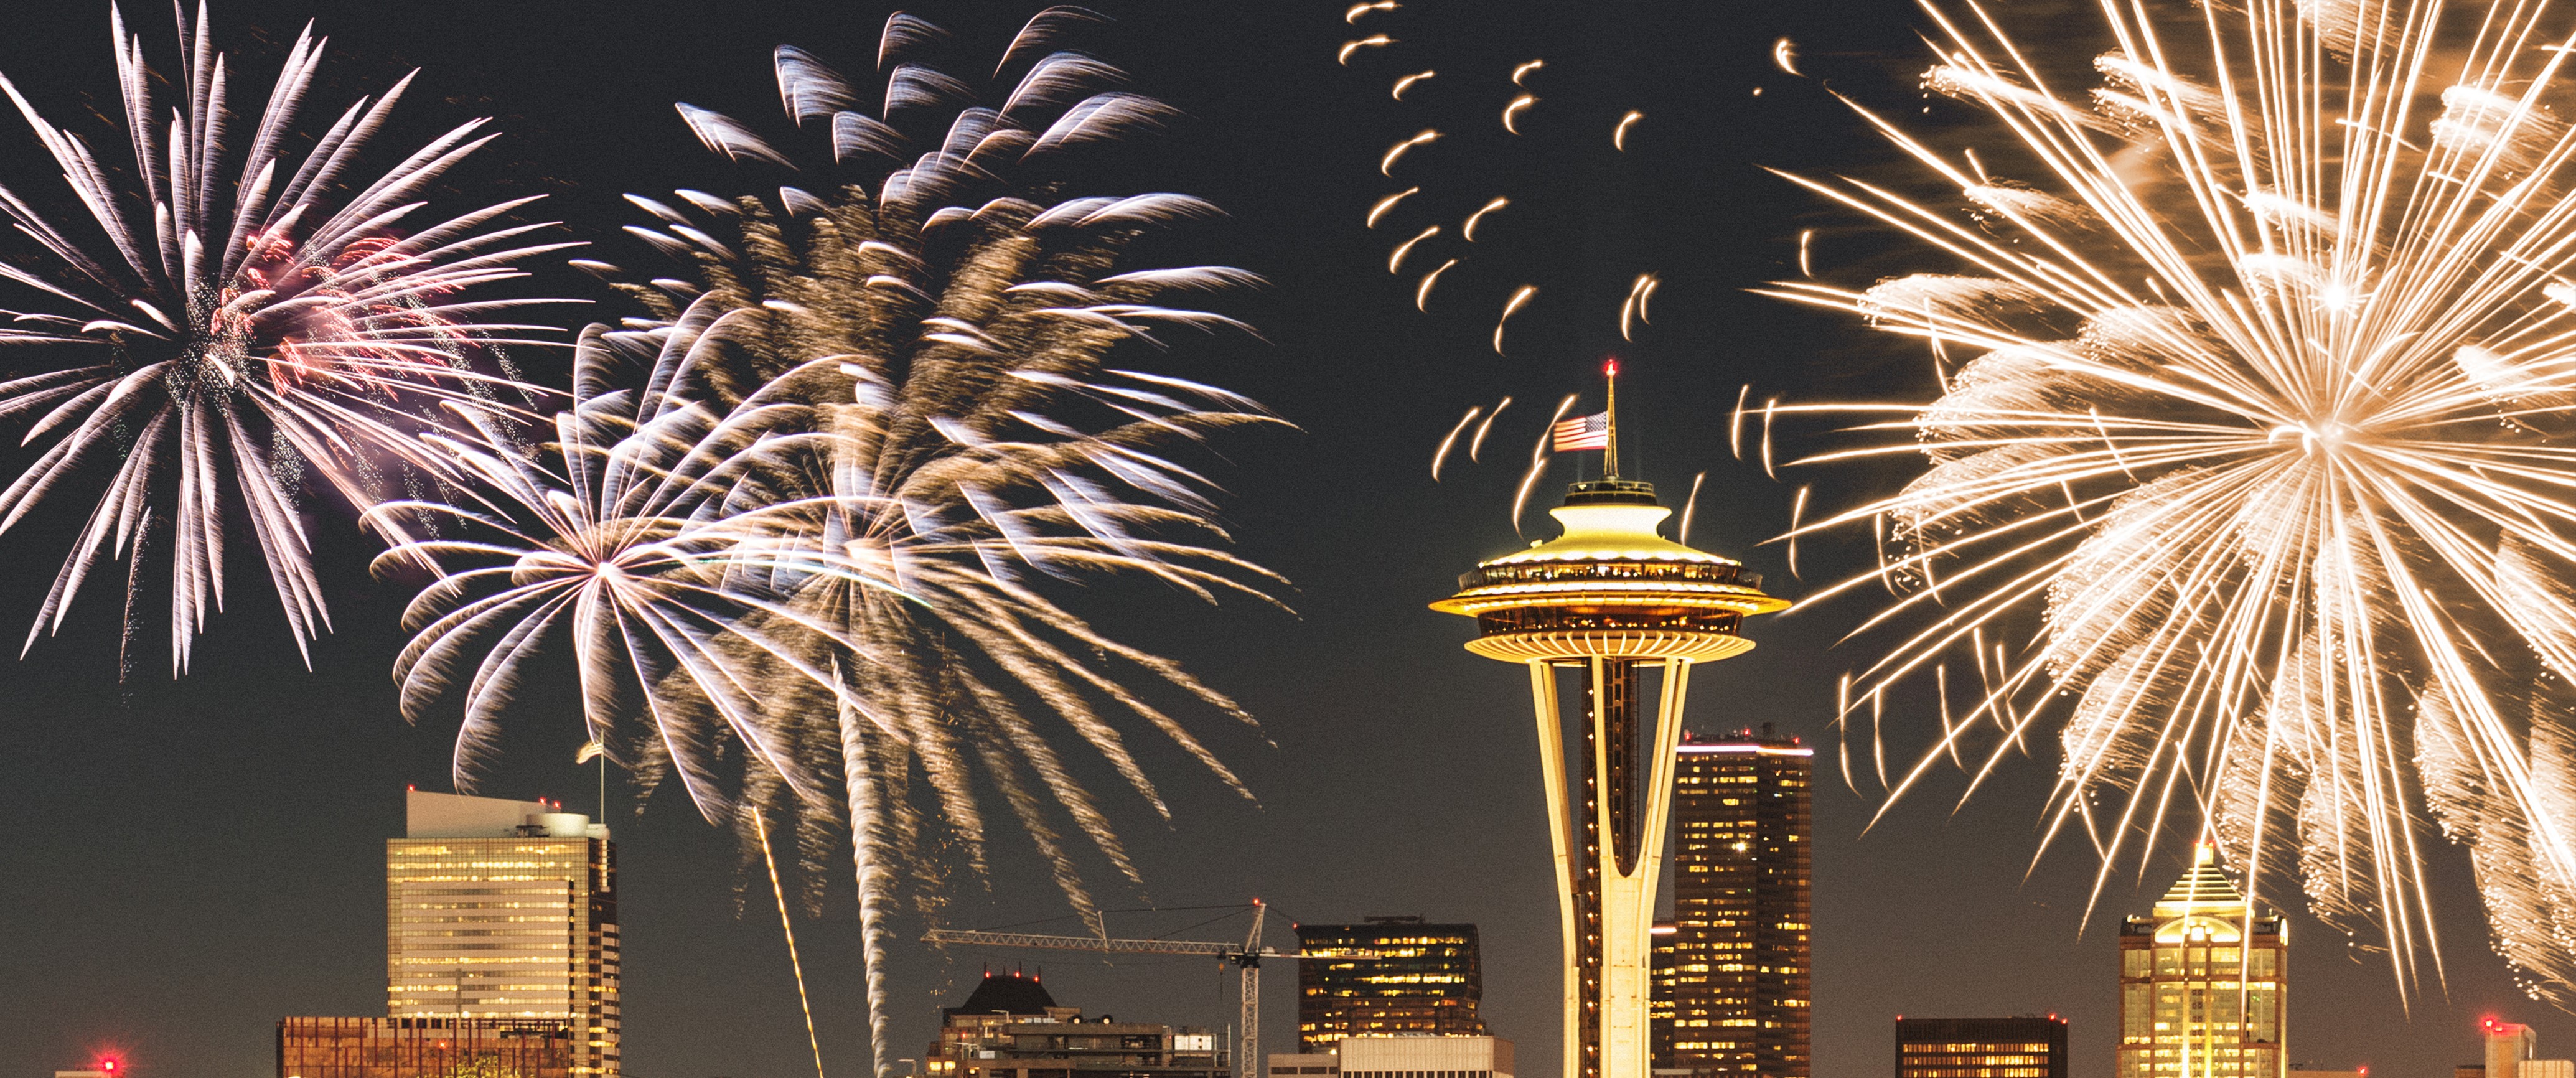 fireworks for a national holiday in Seattle Argosy Cruises